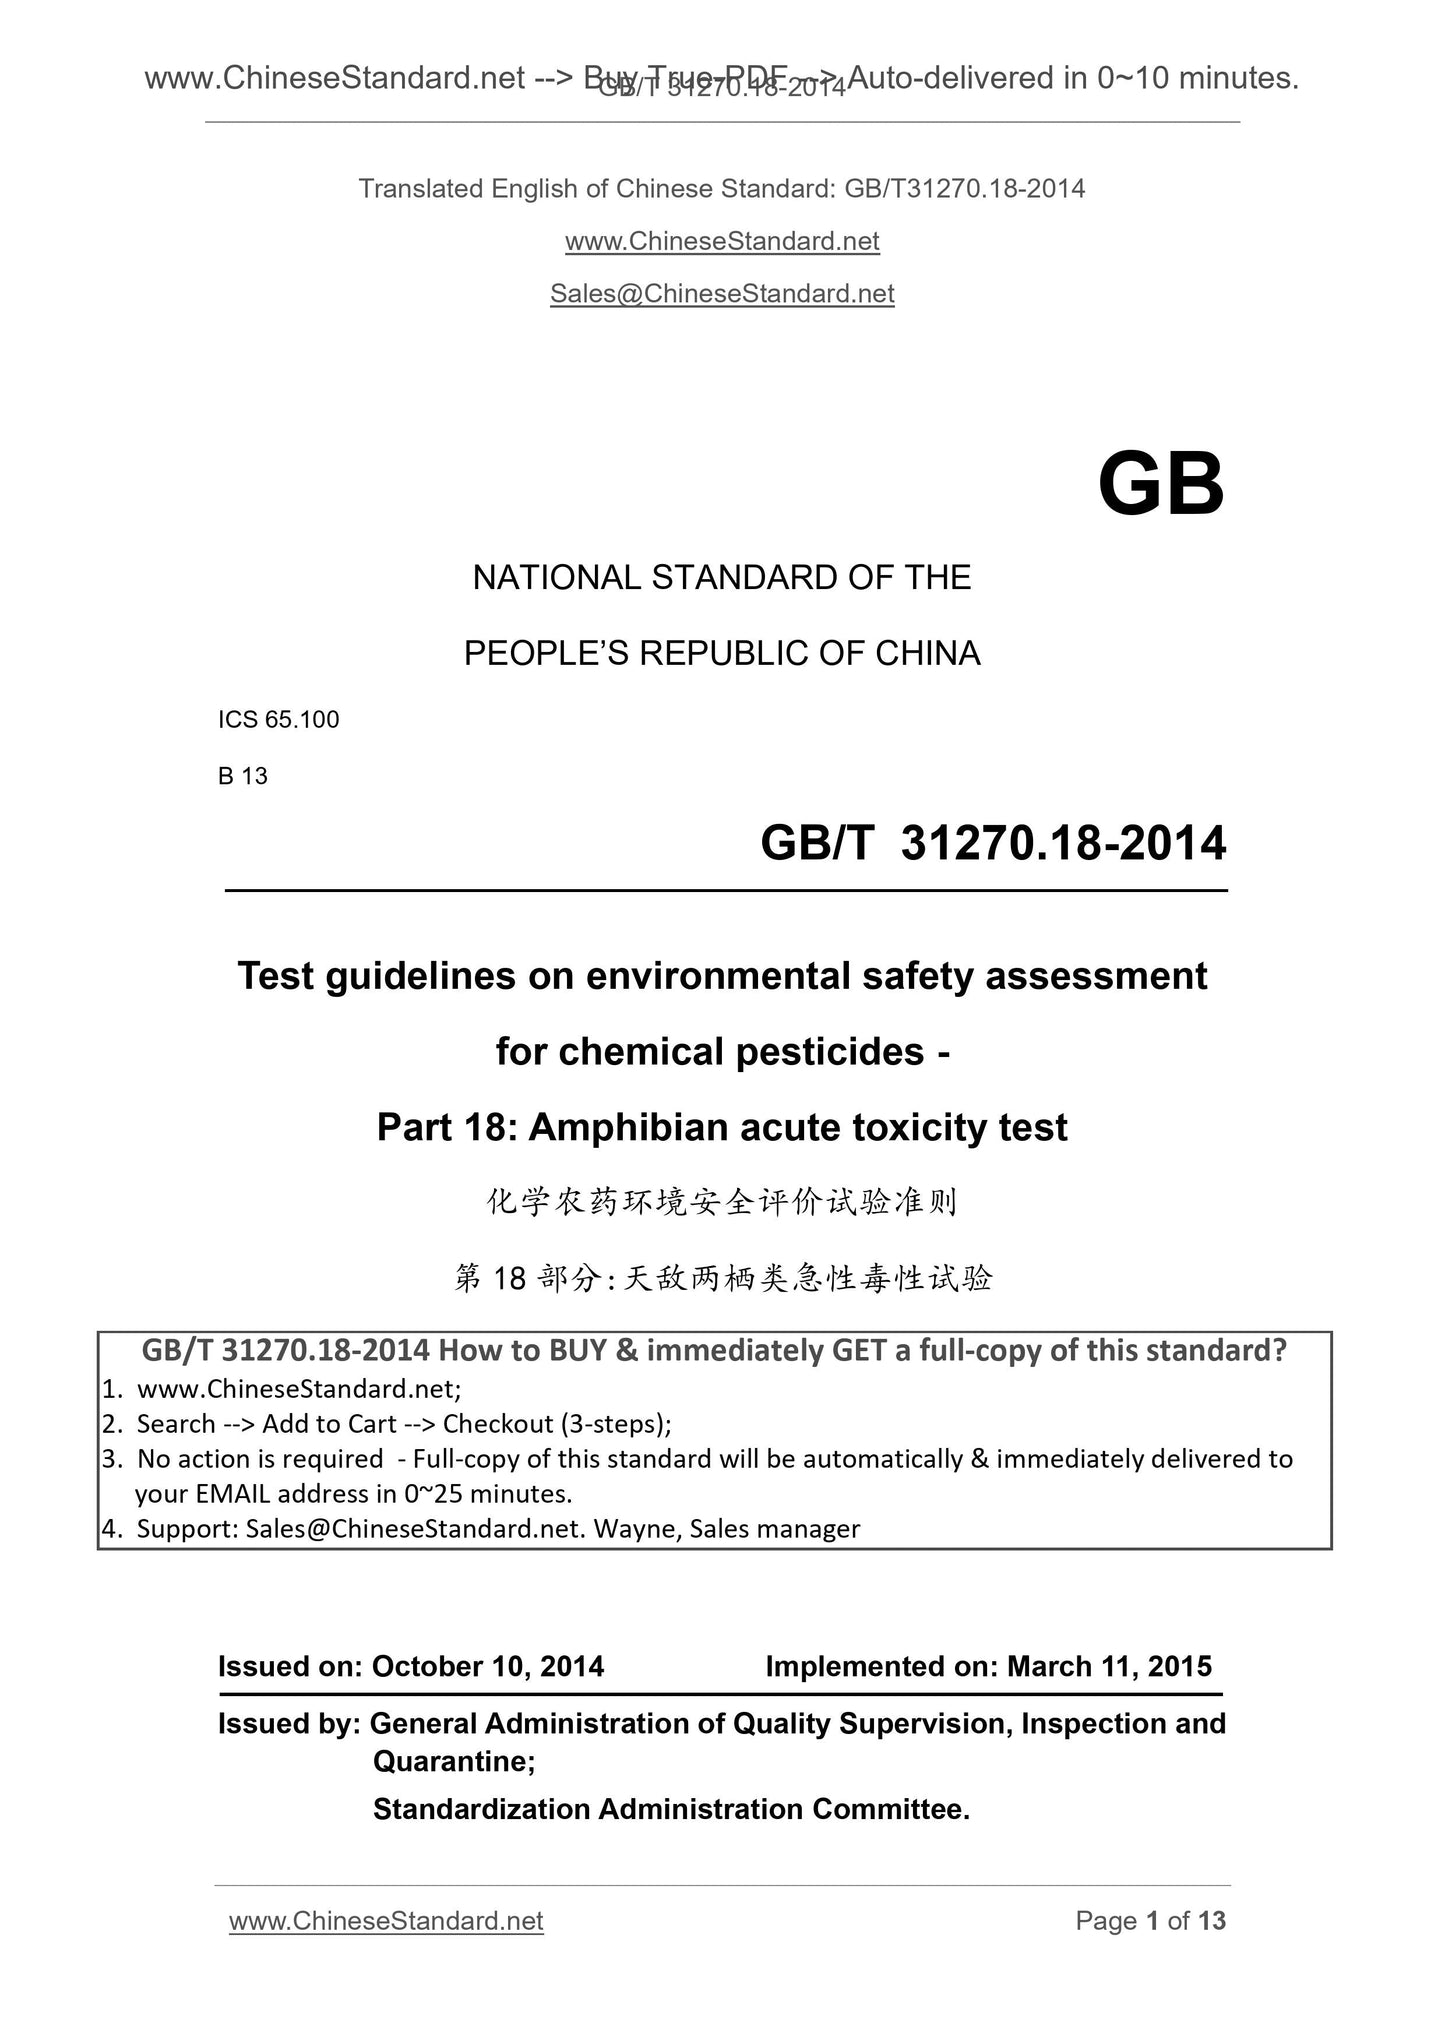 GB/T 31270.18-2014 Page 1